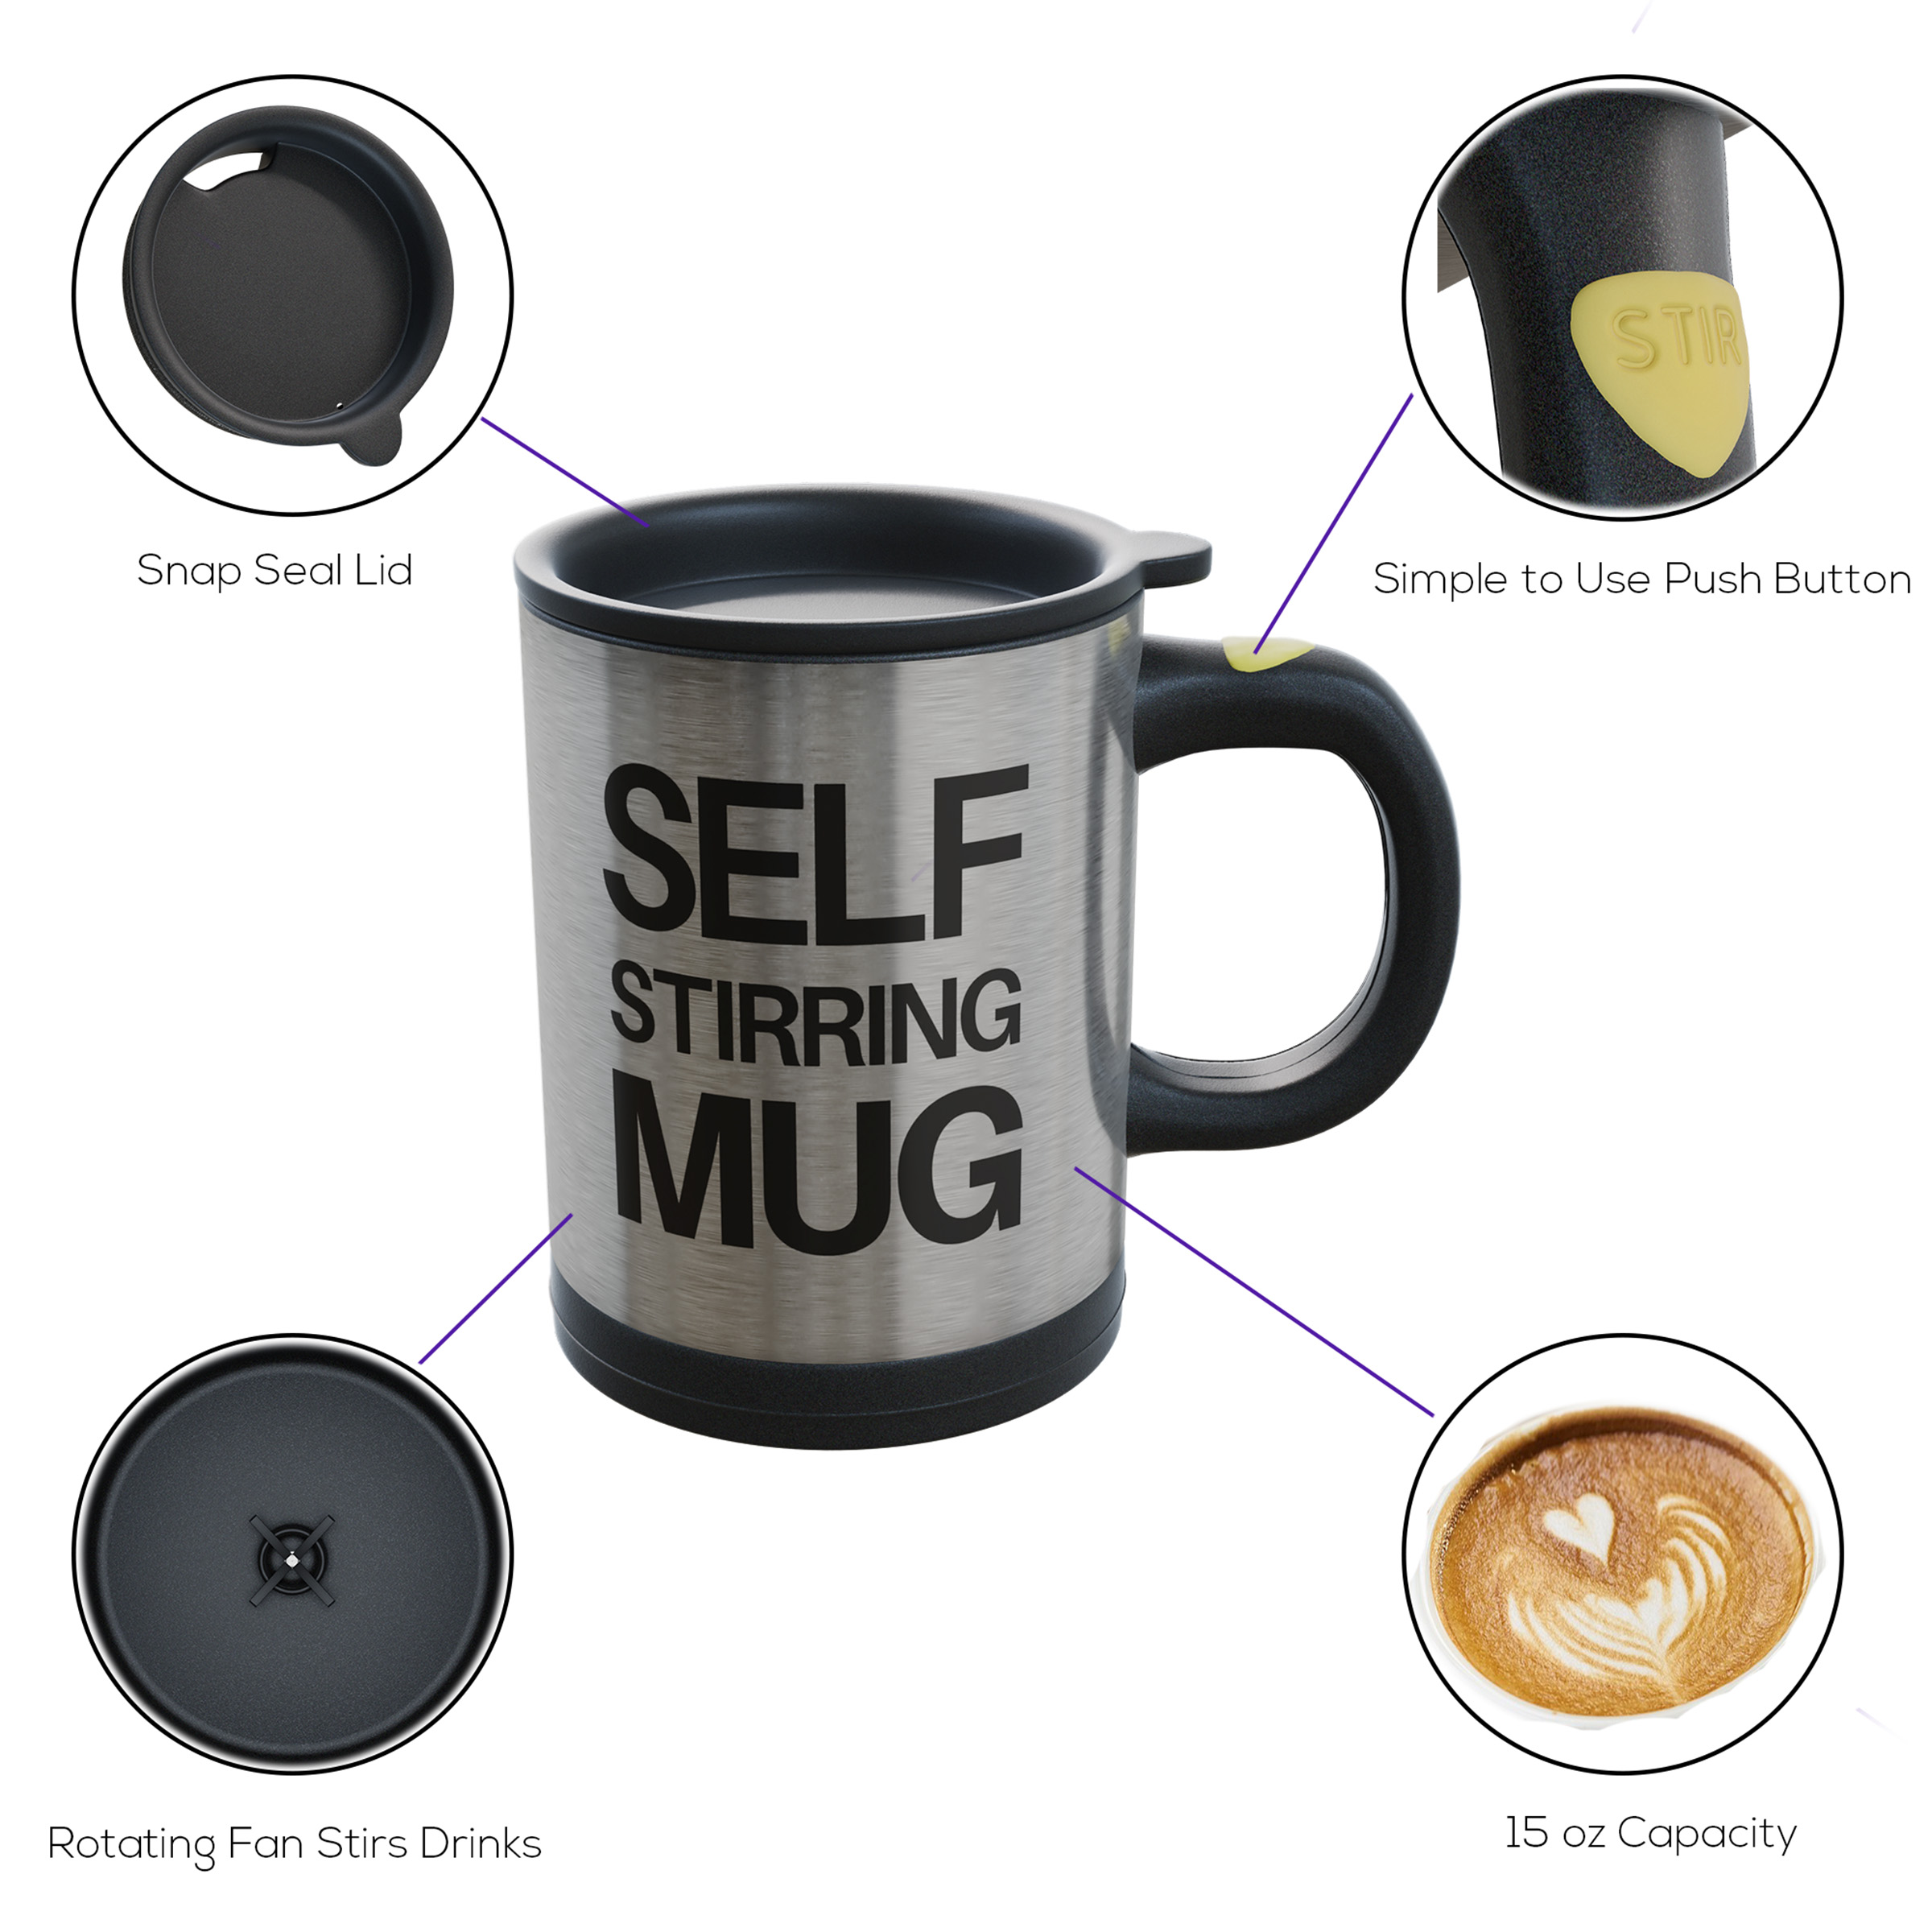 Self Stirring Mug- Reusable Auto Mixing Cup with Travel Lid for Protein Mix, Bulletproof Coffee, Chocolate Milk, Hot Cocoa by Chef Buddy, 15 ozChef Buddy Self Stirring Coffee Hot Chocolate - image 3 of 6